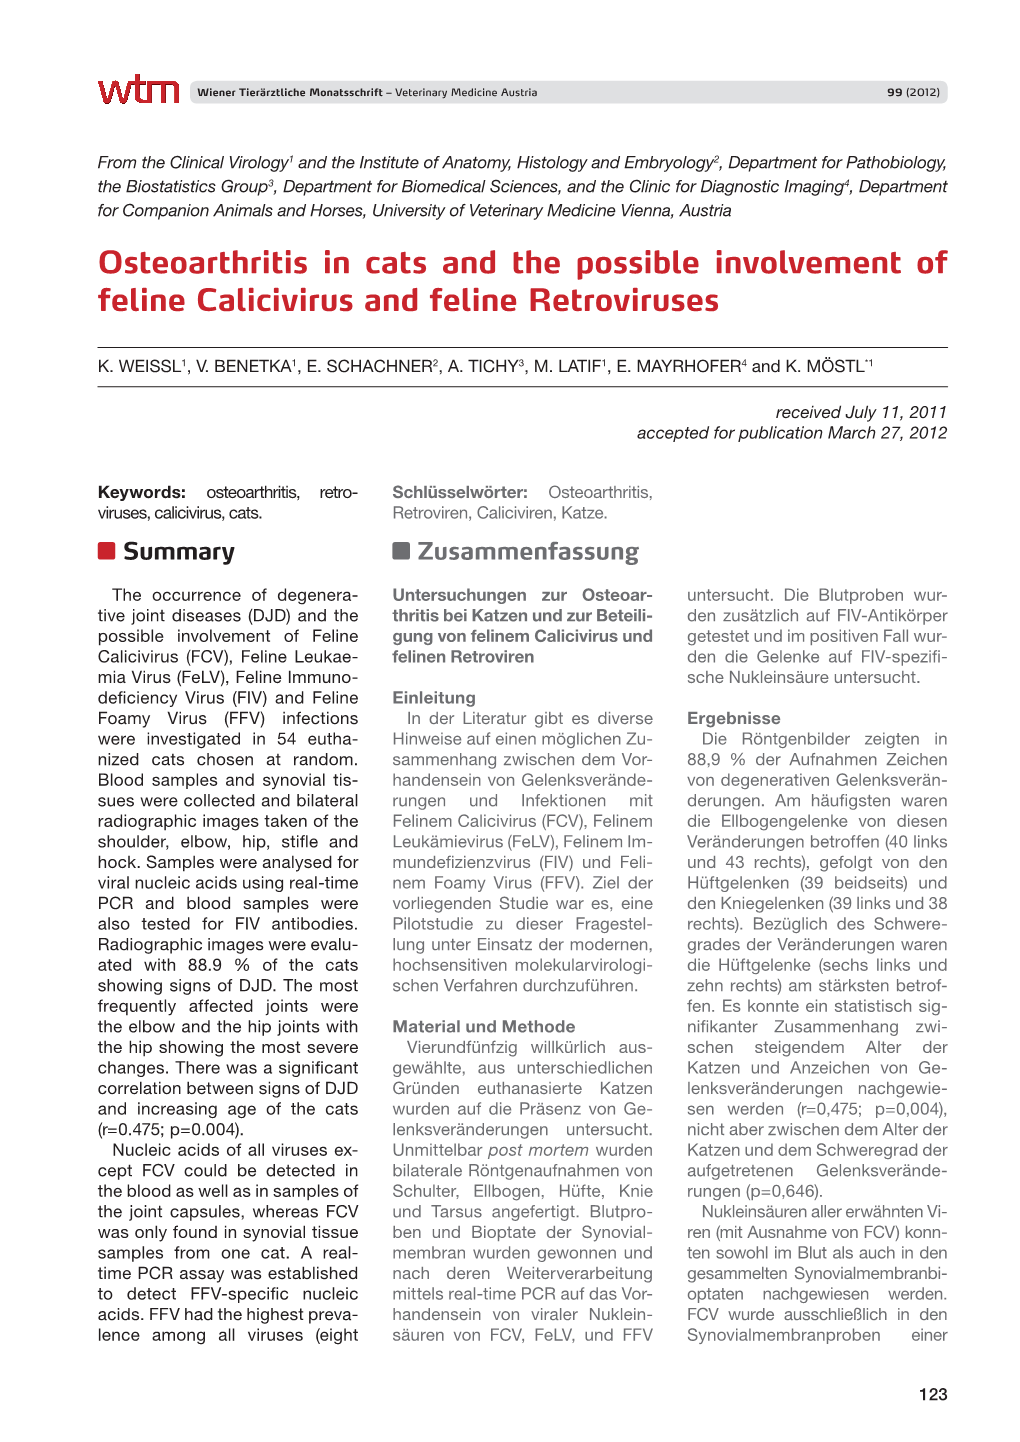 Osteoarthritis in Cats and the Possible Involvement of Feline Calicivirus and Feline Retroviruses